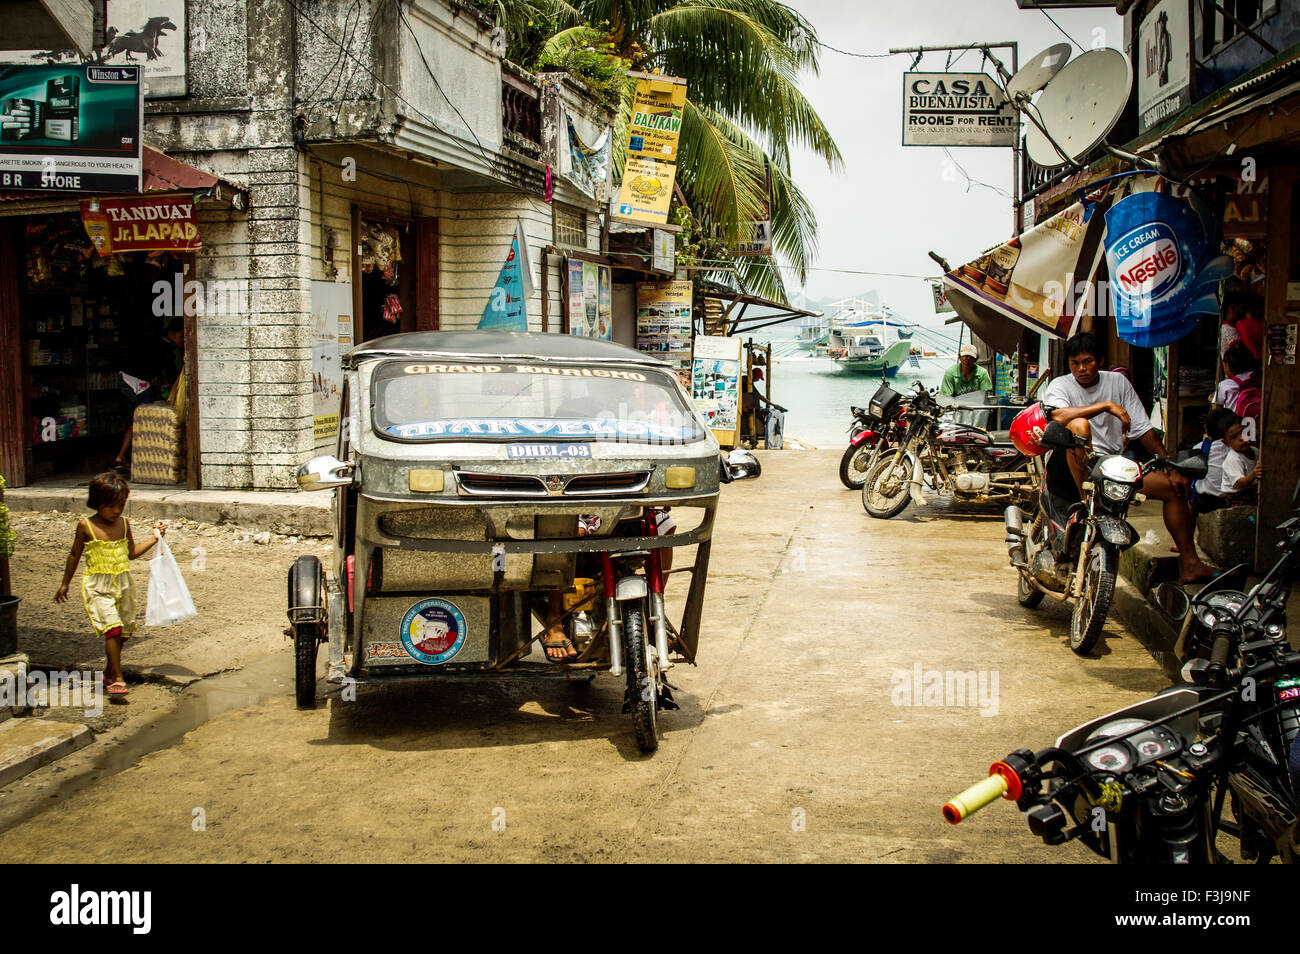 Tricycle in El Nido - Palawan, Philippines Stock Photo